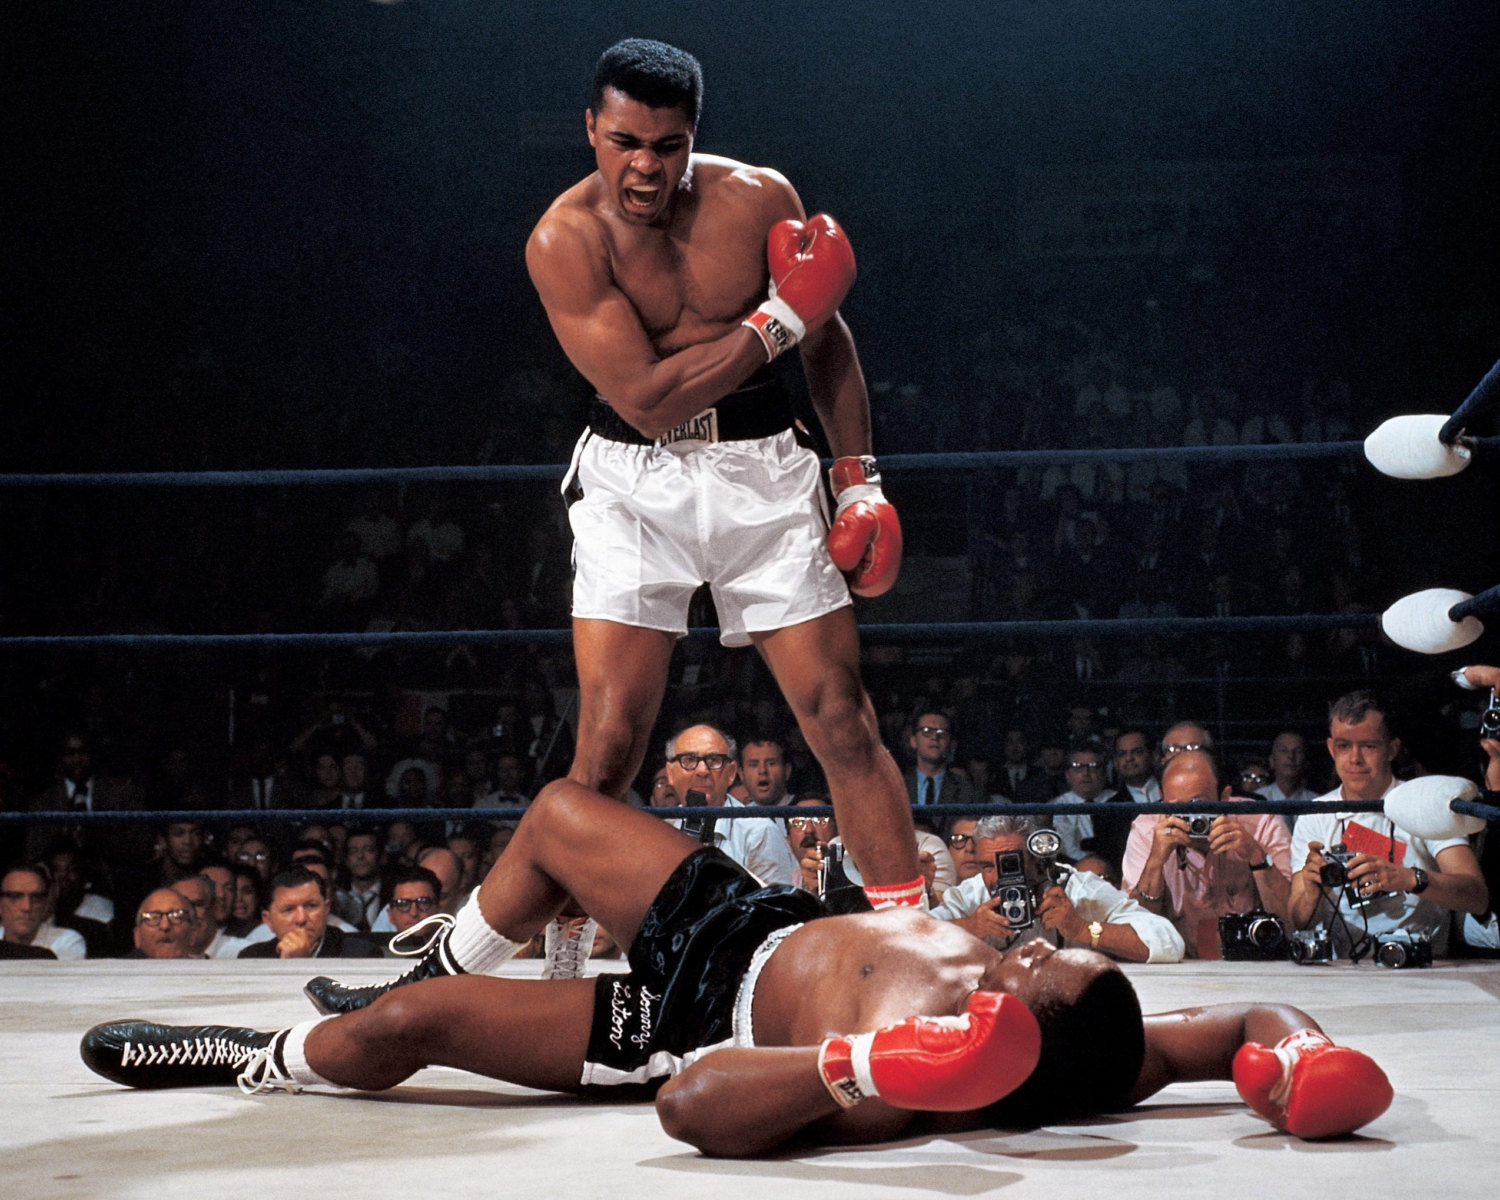 Muhammad Ali vs. Sonny Liston - Sports Illustrated photographer Neil Leifer was in the right place at the right time to snap what is perhaps the greatest sports photo of the 20th century, but he was only there because a senior photographer had arrived before him and essentially forced him to that side of the ring. Leifer was only 22 at the time, and fellow Sports Illustrated photographer Herb Scharfman got there first and pulled rank to claim a prime spot by the judges’ table. Leifer’s seat on the opposite side ended up being perfectly positioned for that historic photo, while Scharfman was stuck shooting toward Ali’s back. Scharfman can be seen in the crowd between Ali’s legs in Leifer’s photo. “It didn’t matter how good Herbie was that day,” Leifer said later. “He was in the wrong seat.”